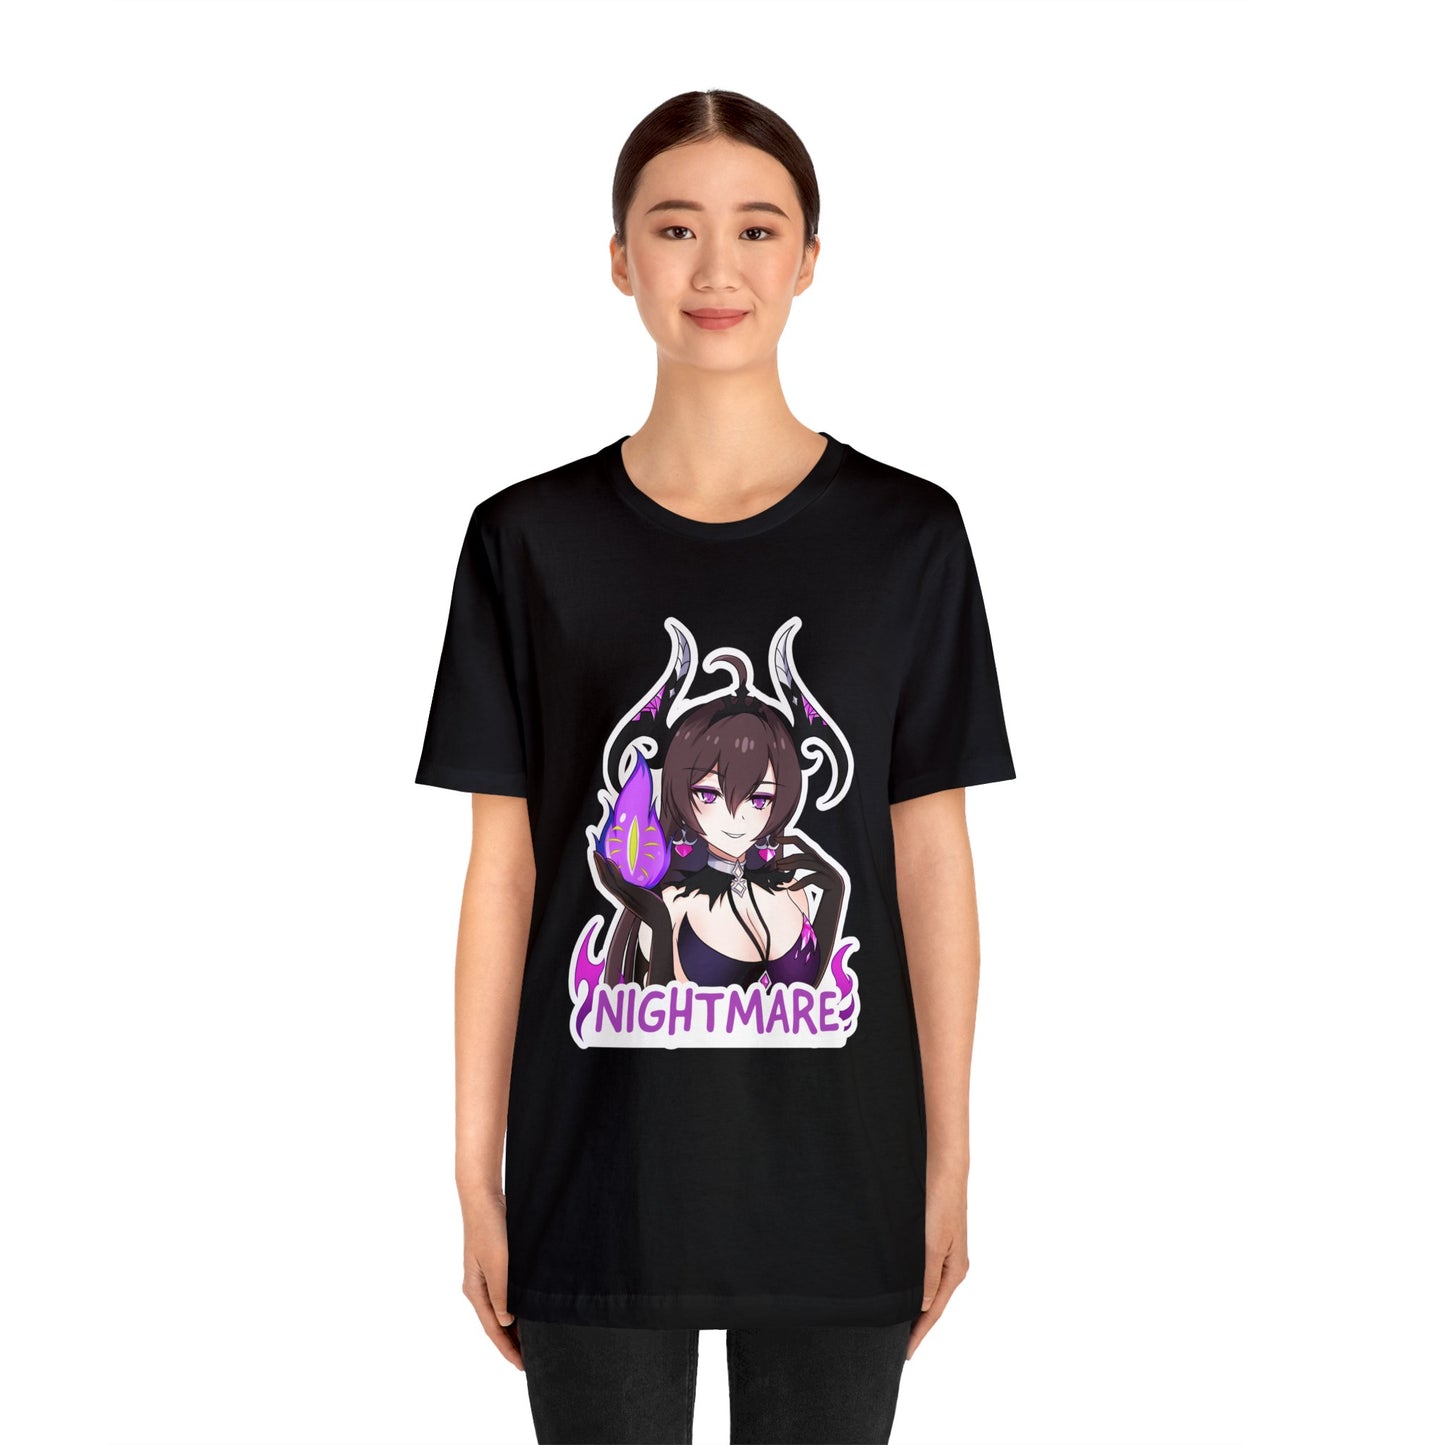 Specter Tenebria "Nightmare" by BruLee - Epic Seven T-Shirt (Unisex)